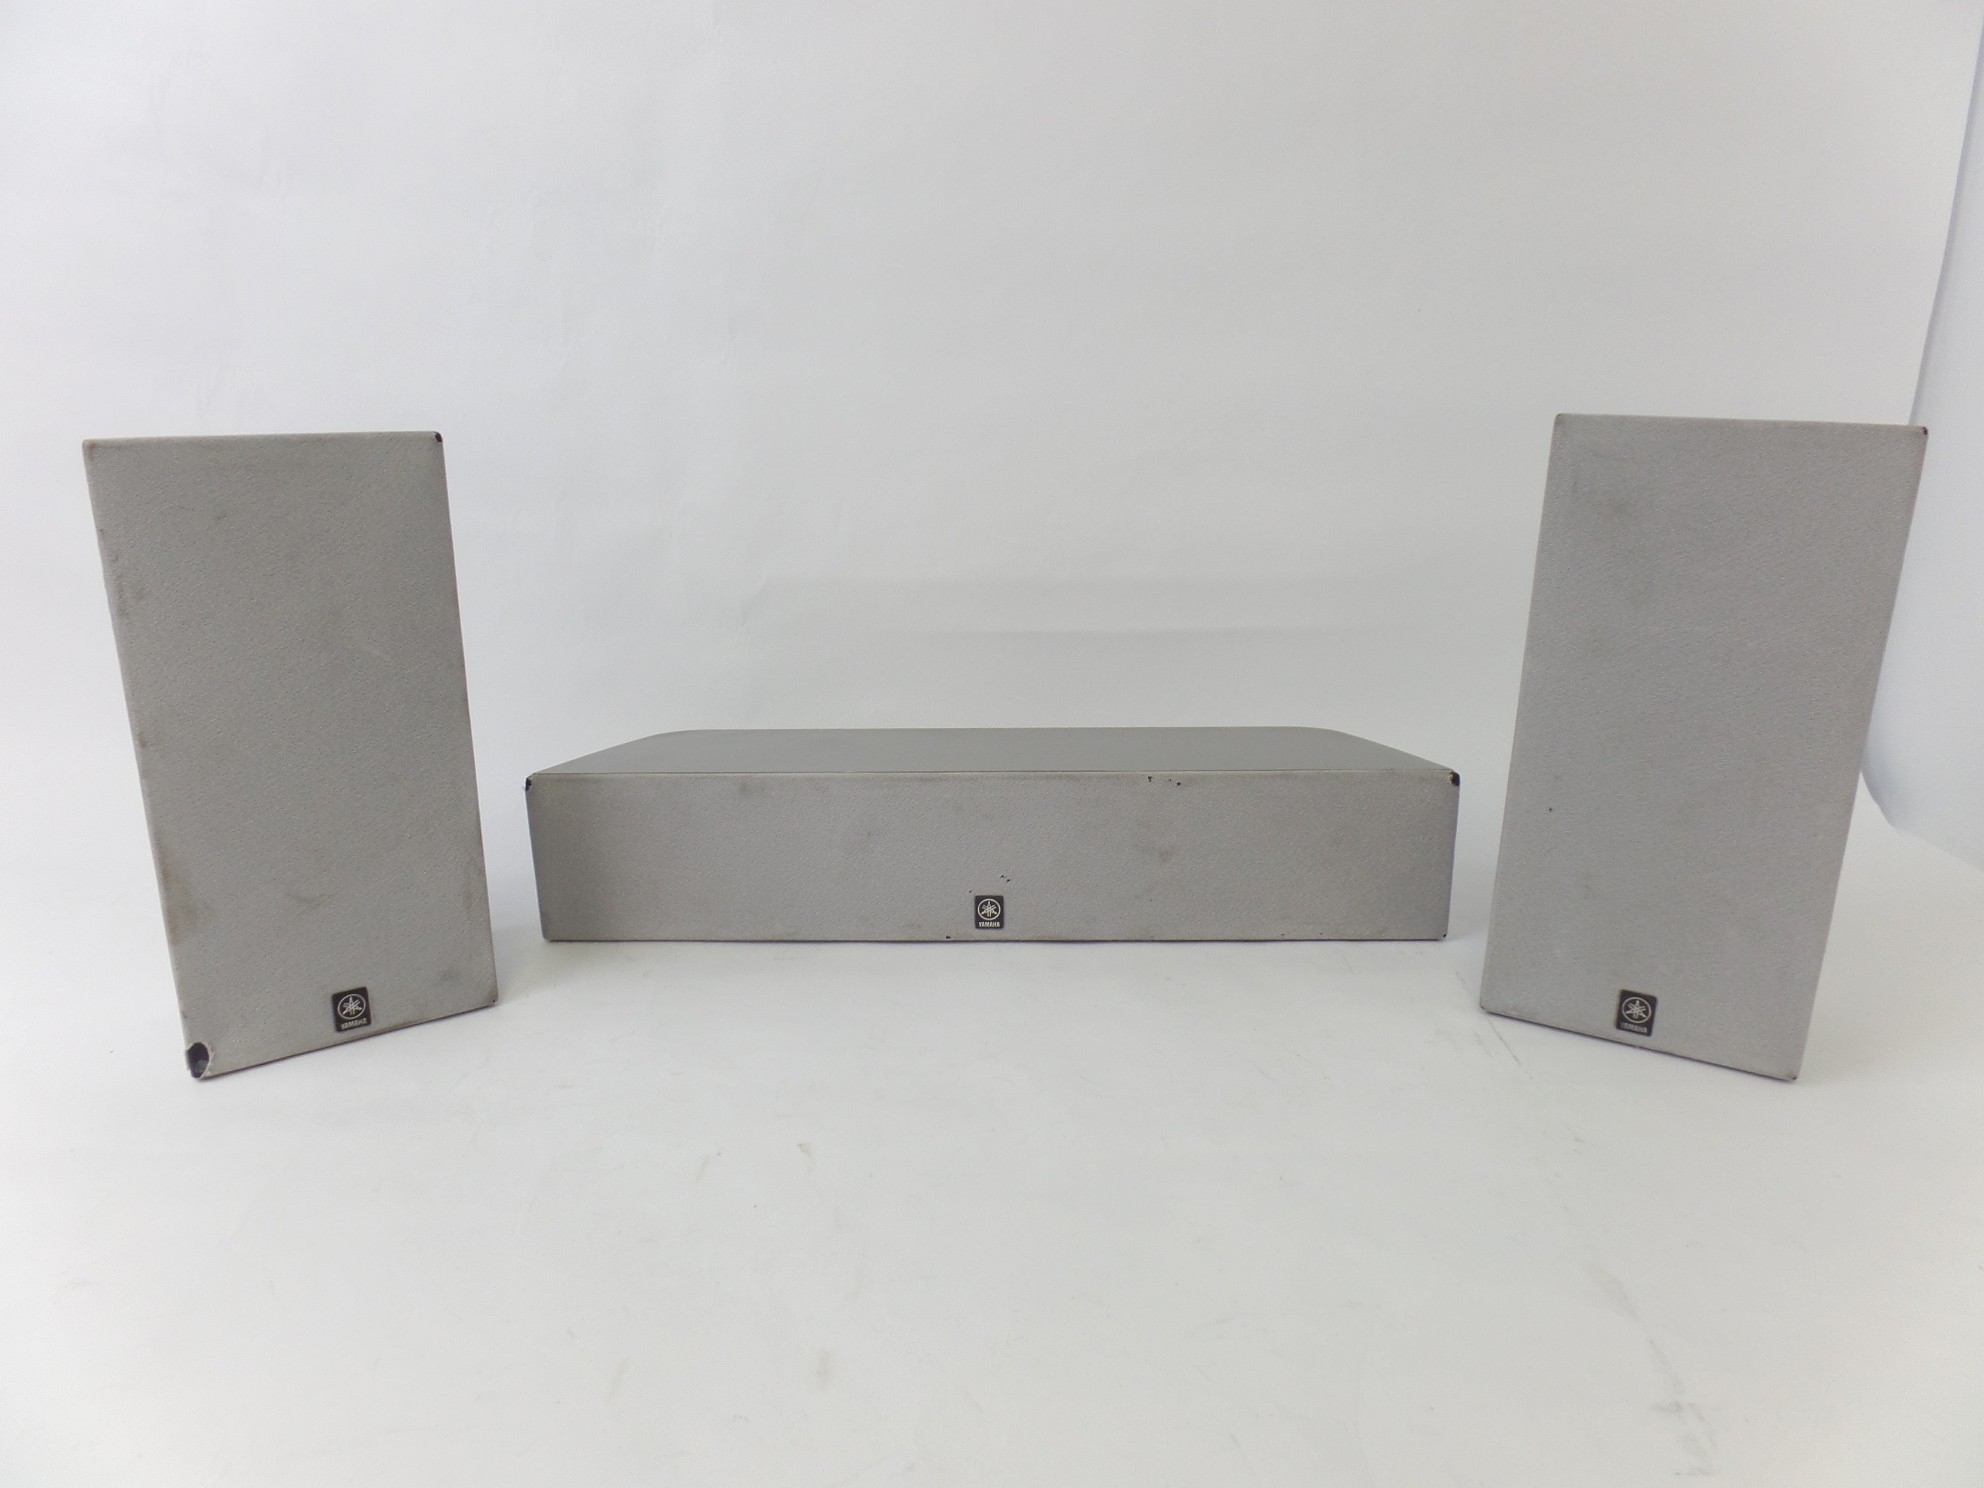 Center and pair of Speakers for Yamaha Home Theater System NX-S100S NX-S100C 